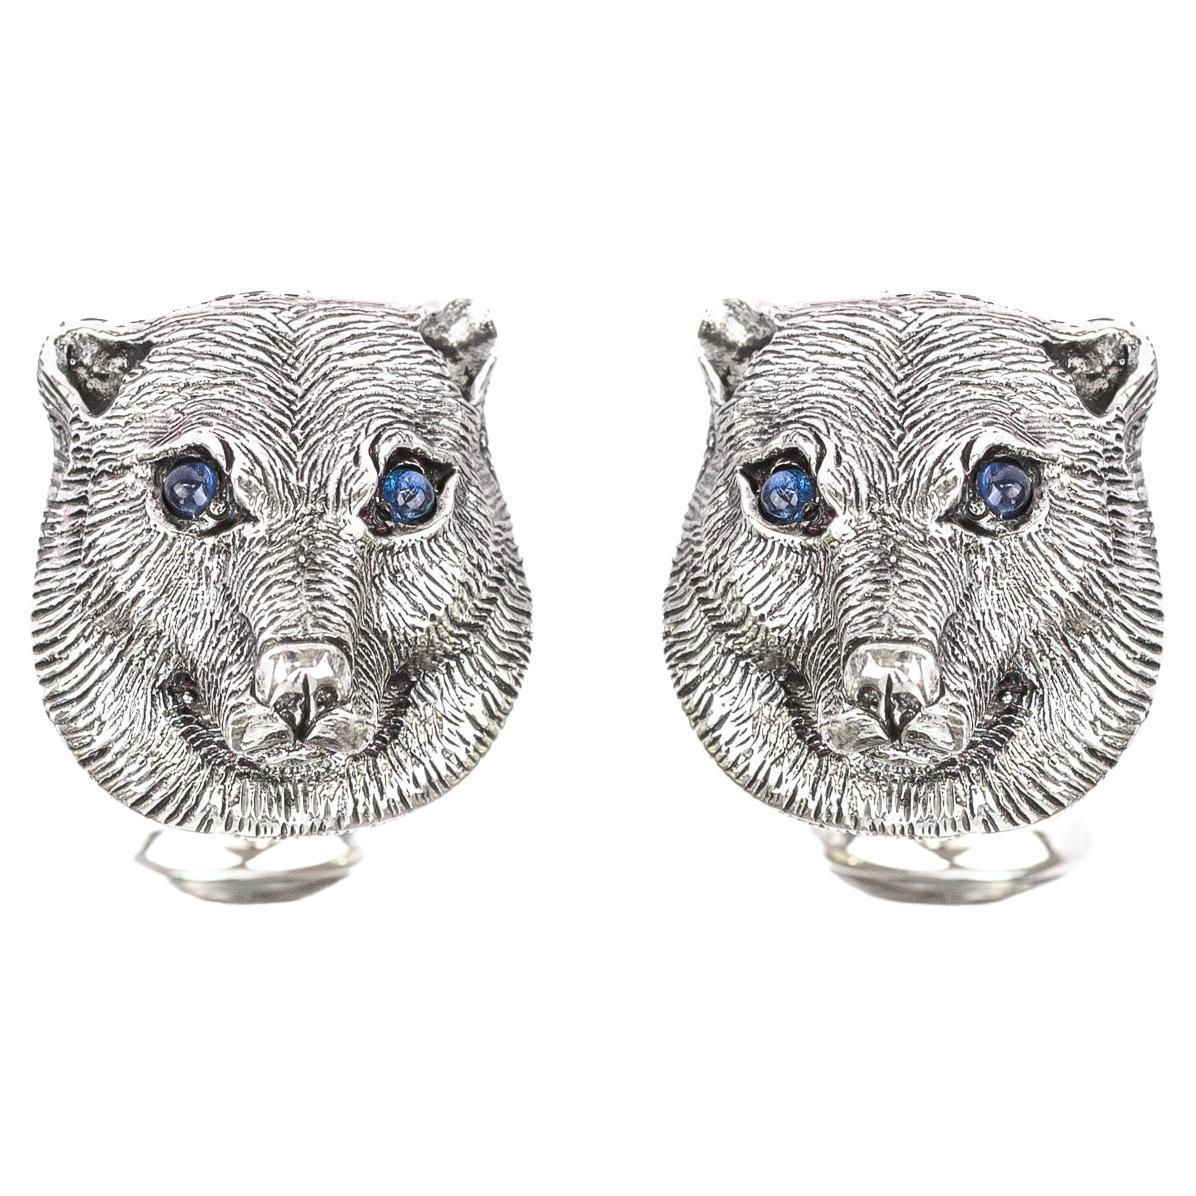 Tichu Blue Sapphire and Crystal Bear Face Cufflink in Sterling Silver